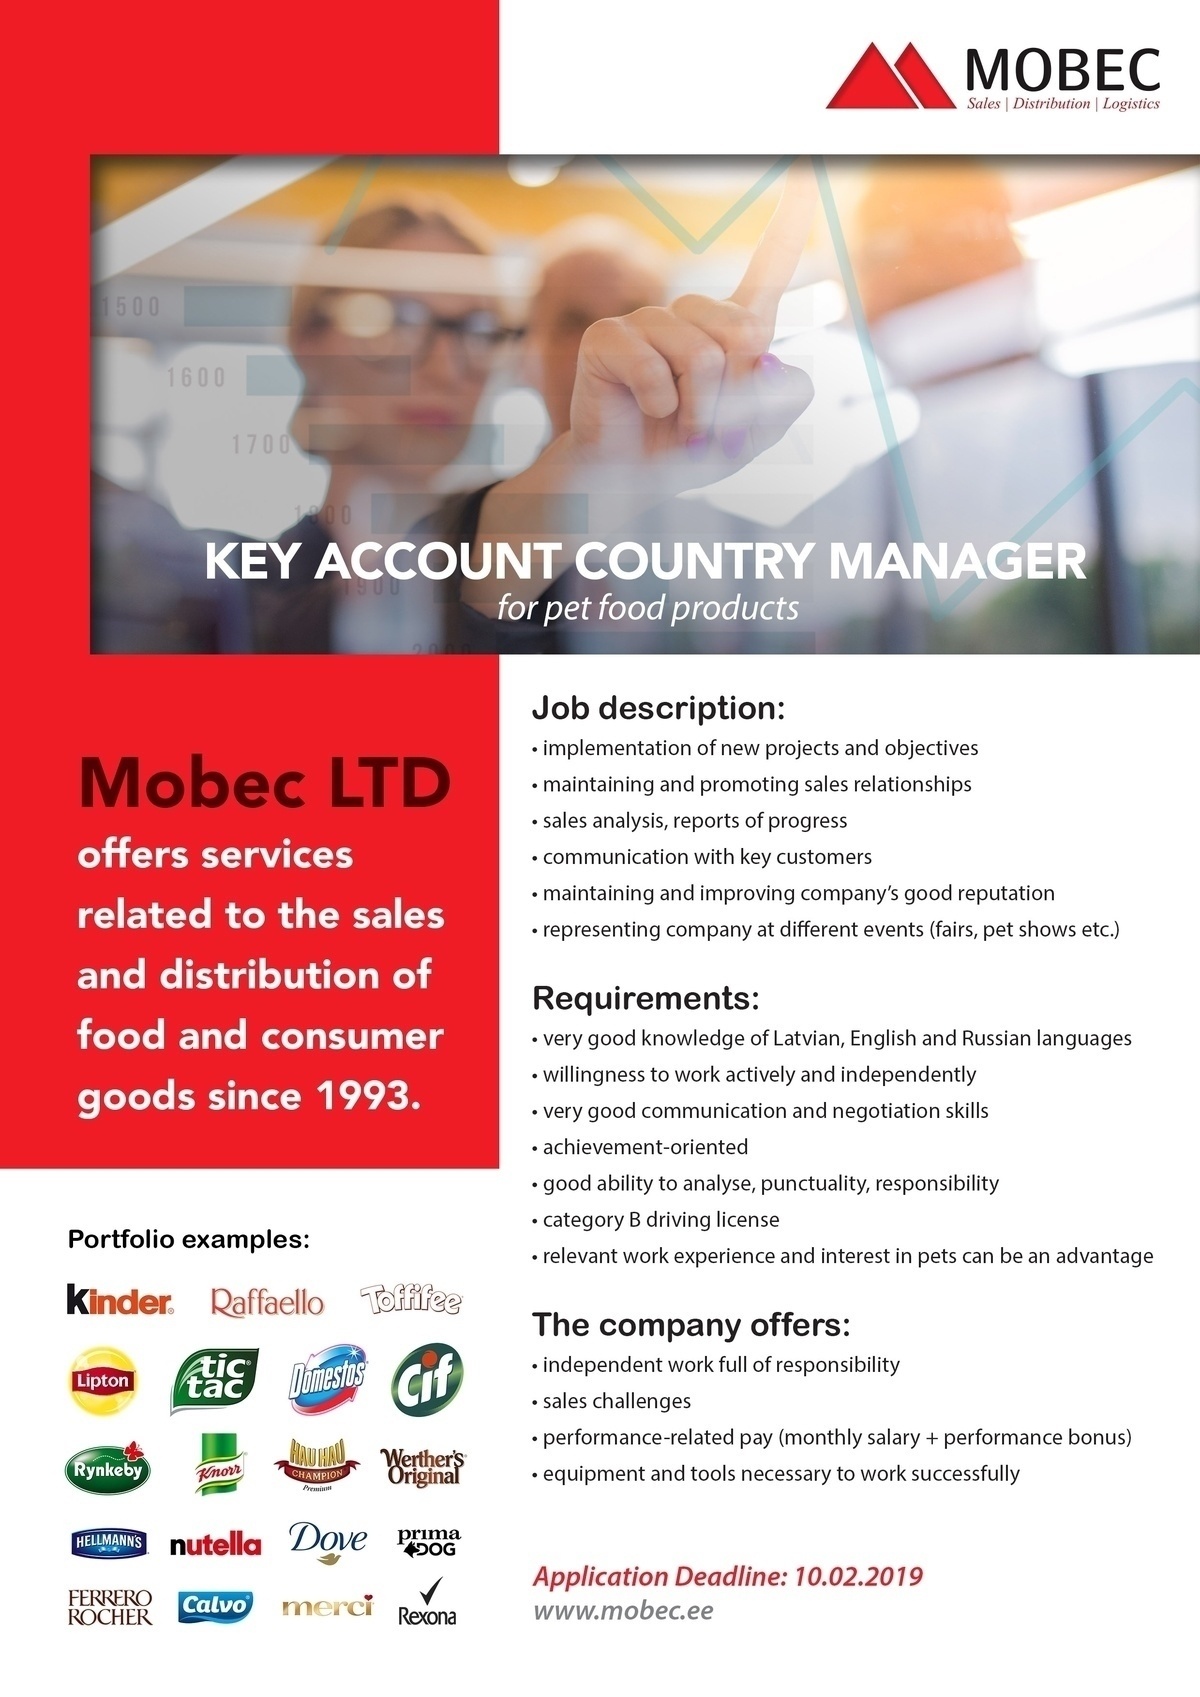 CV Market client Key Account Country Manager